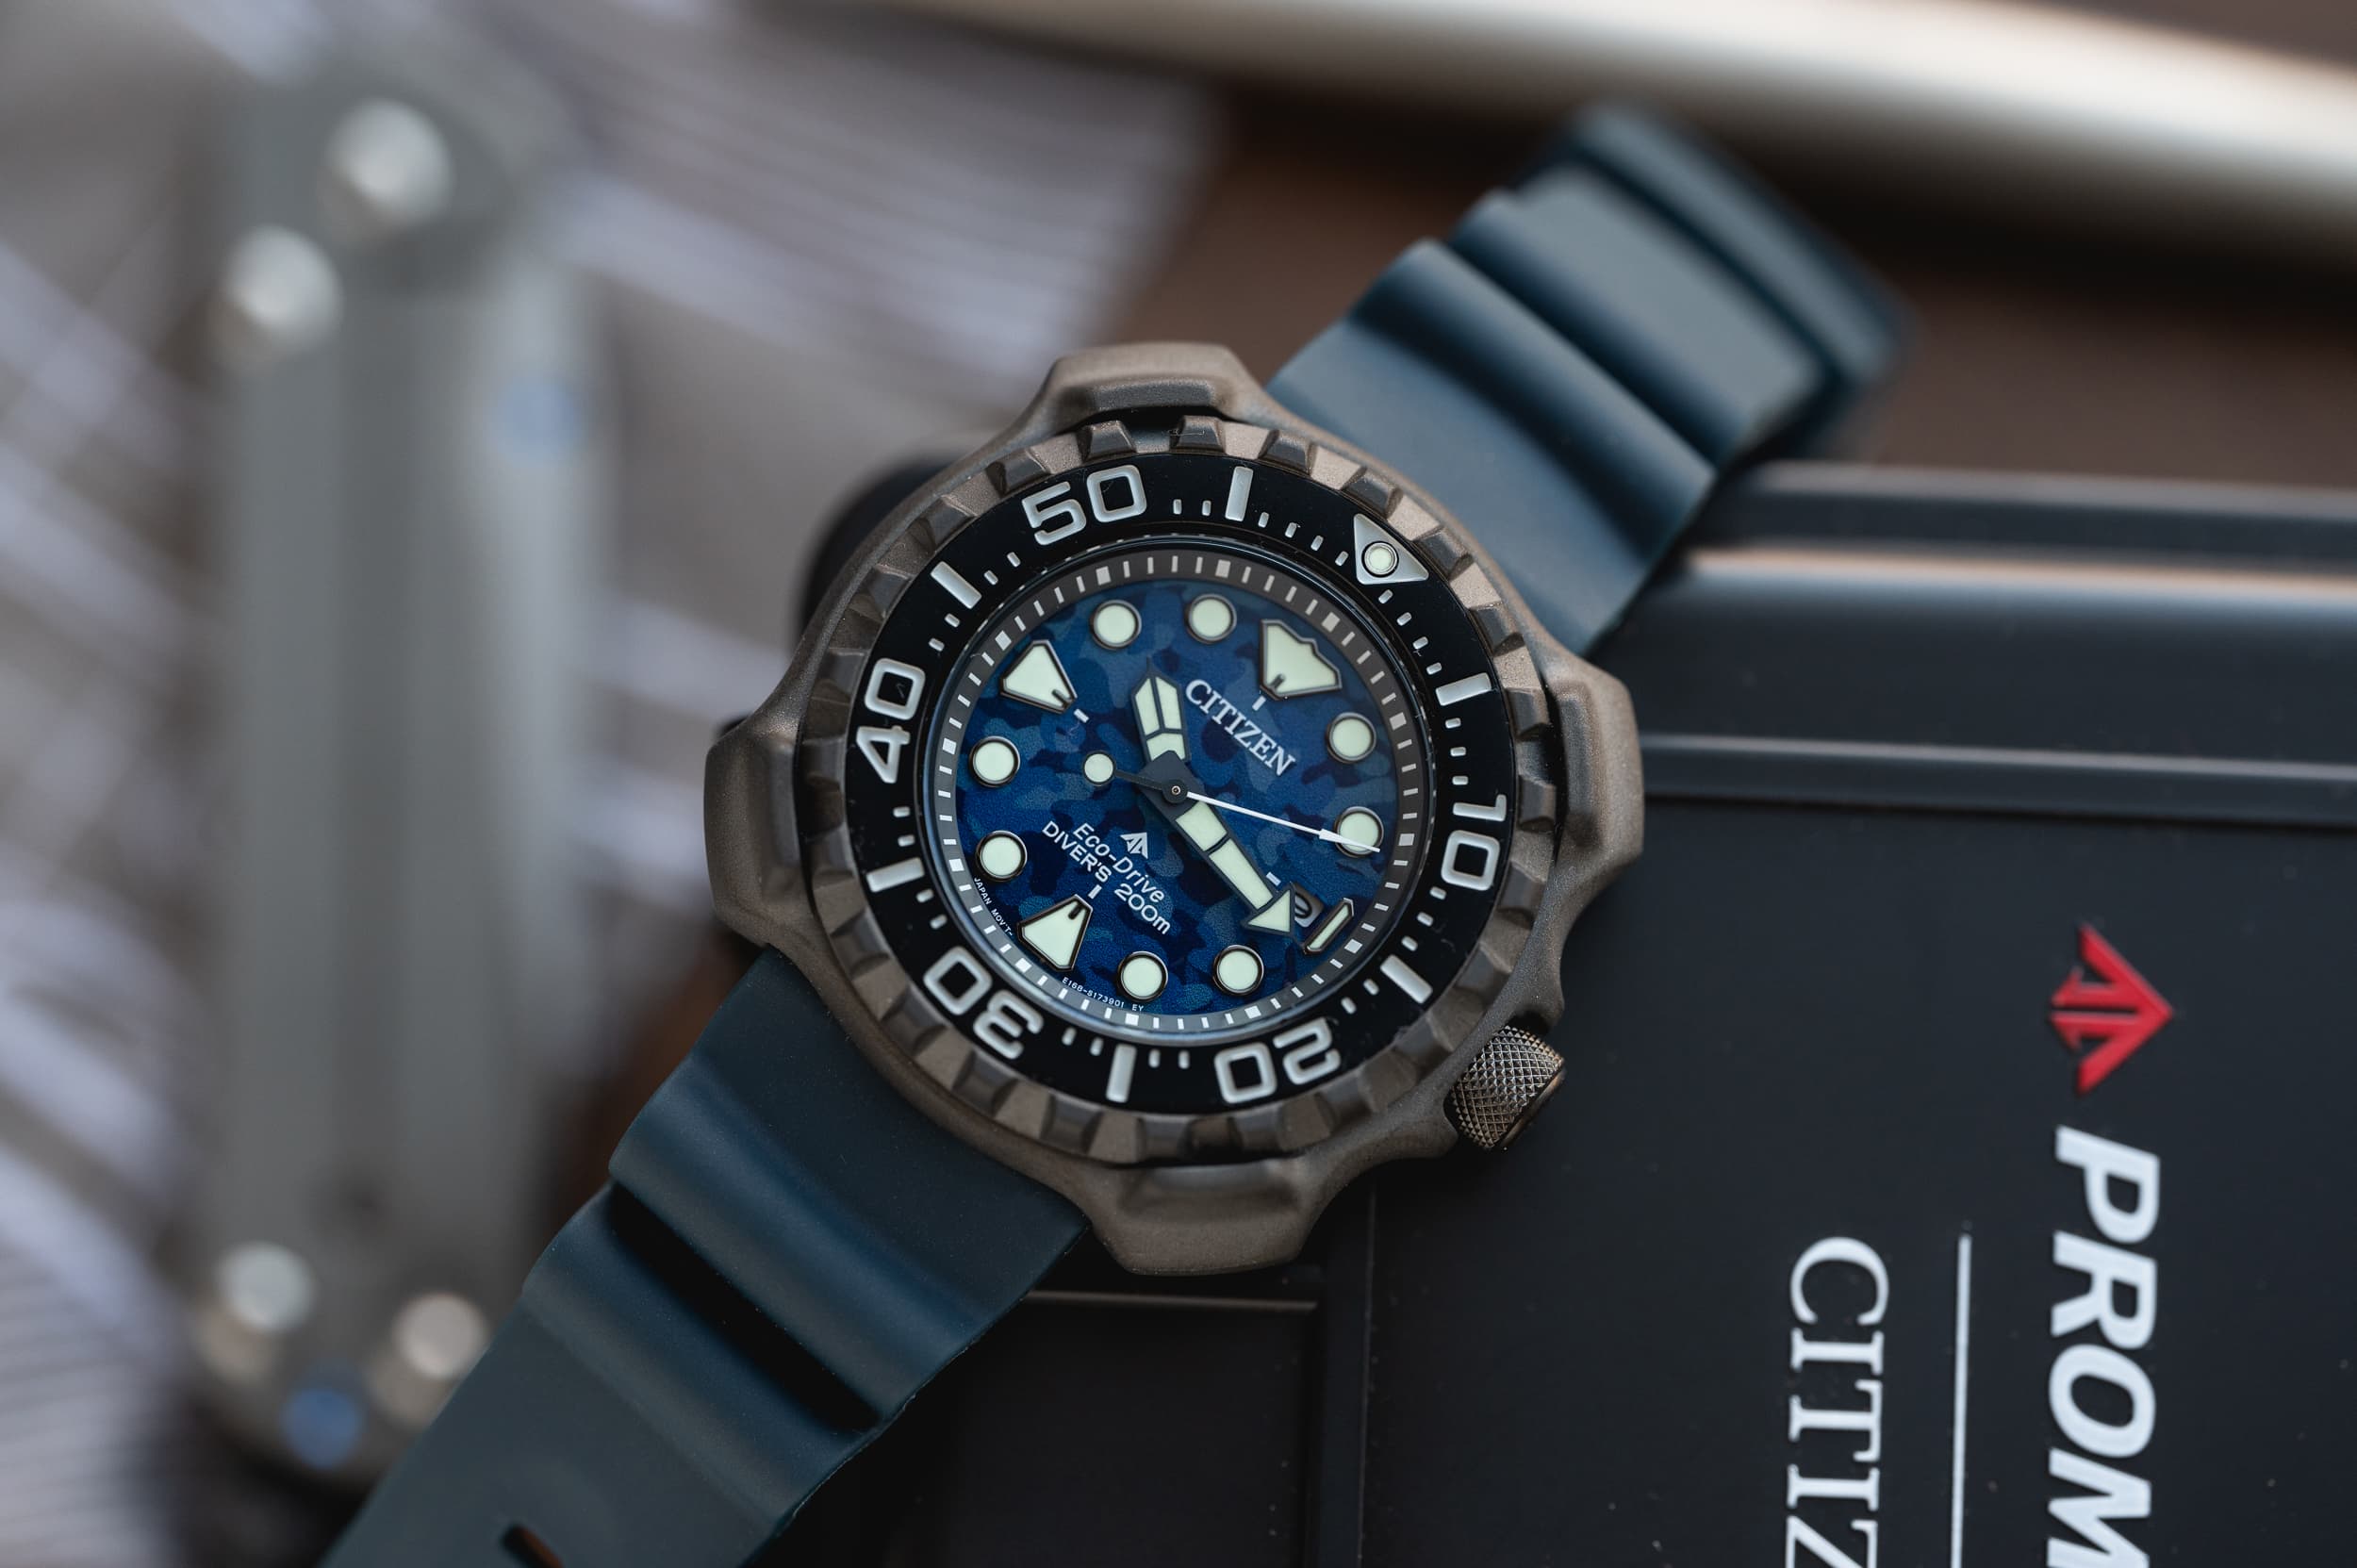 Wound Promaster Worn - The Approachable Assertive & Diver BN0227-09L Citizen Review: Yet